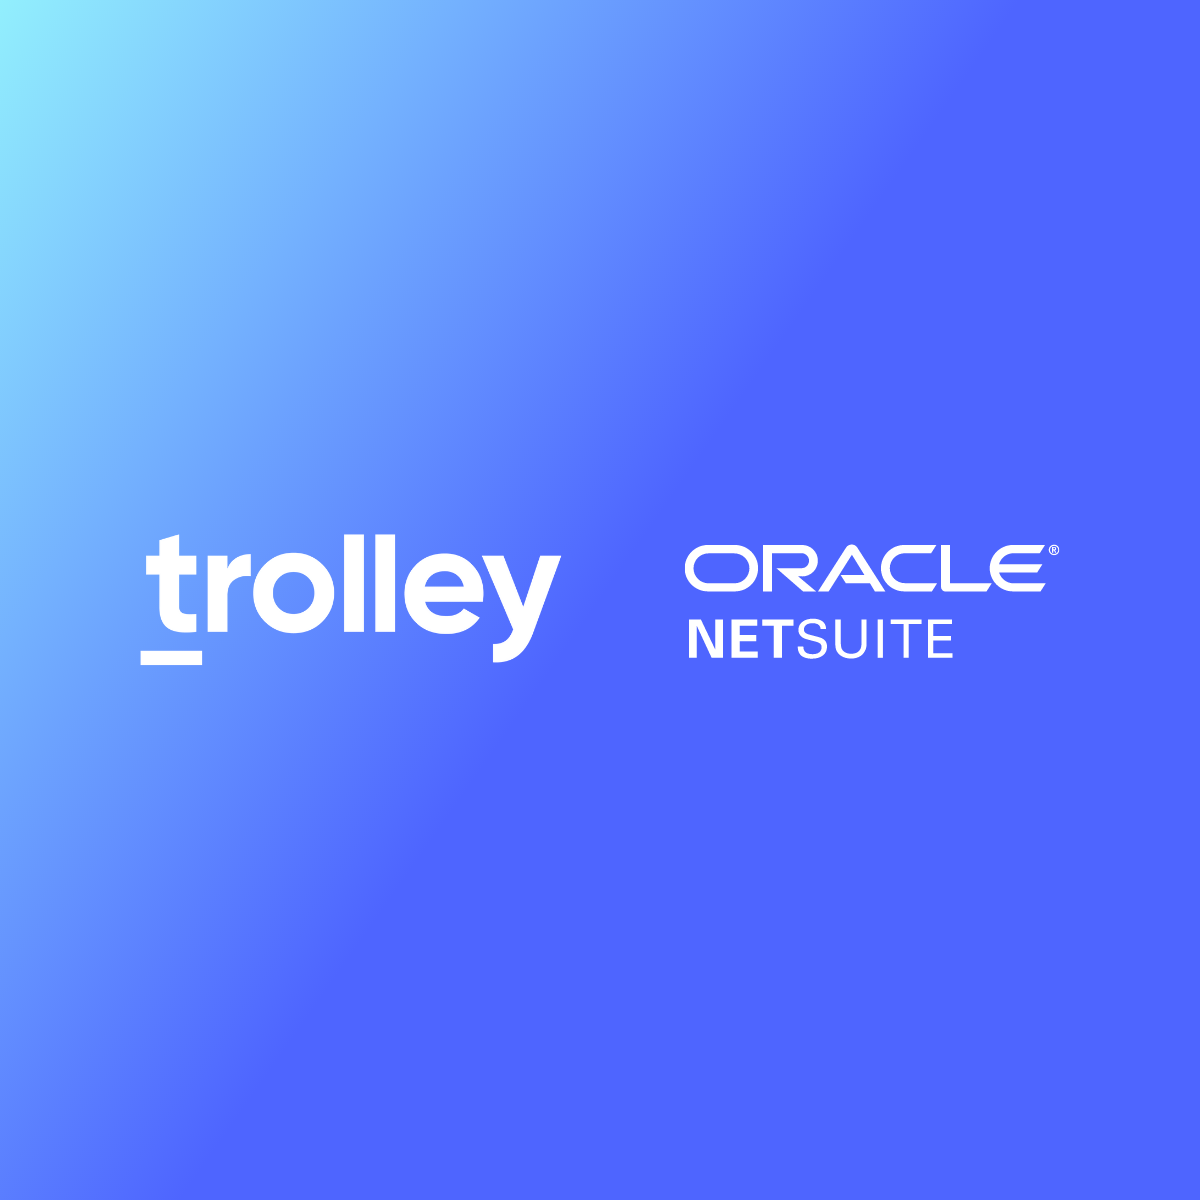 Trolley and Netsuite logos on a blue gradient background